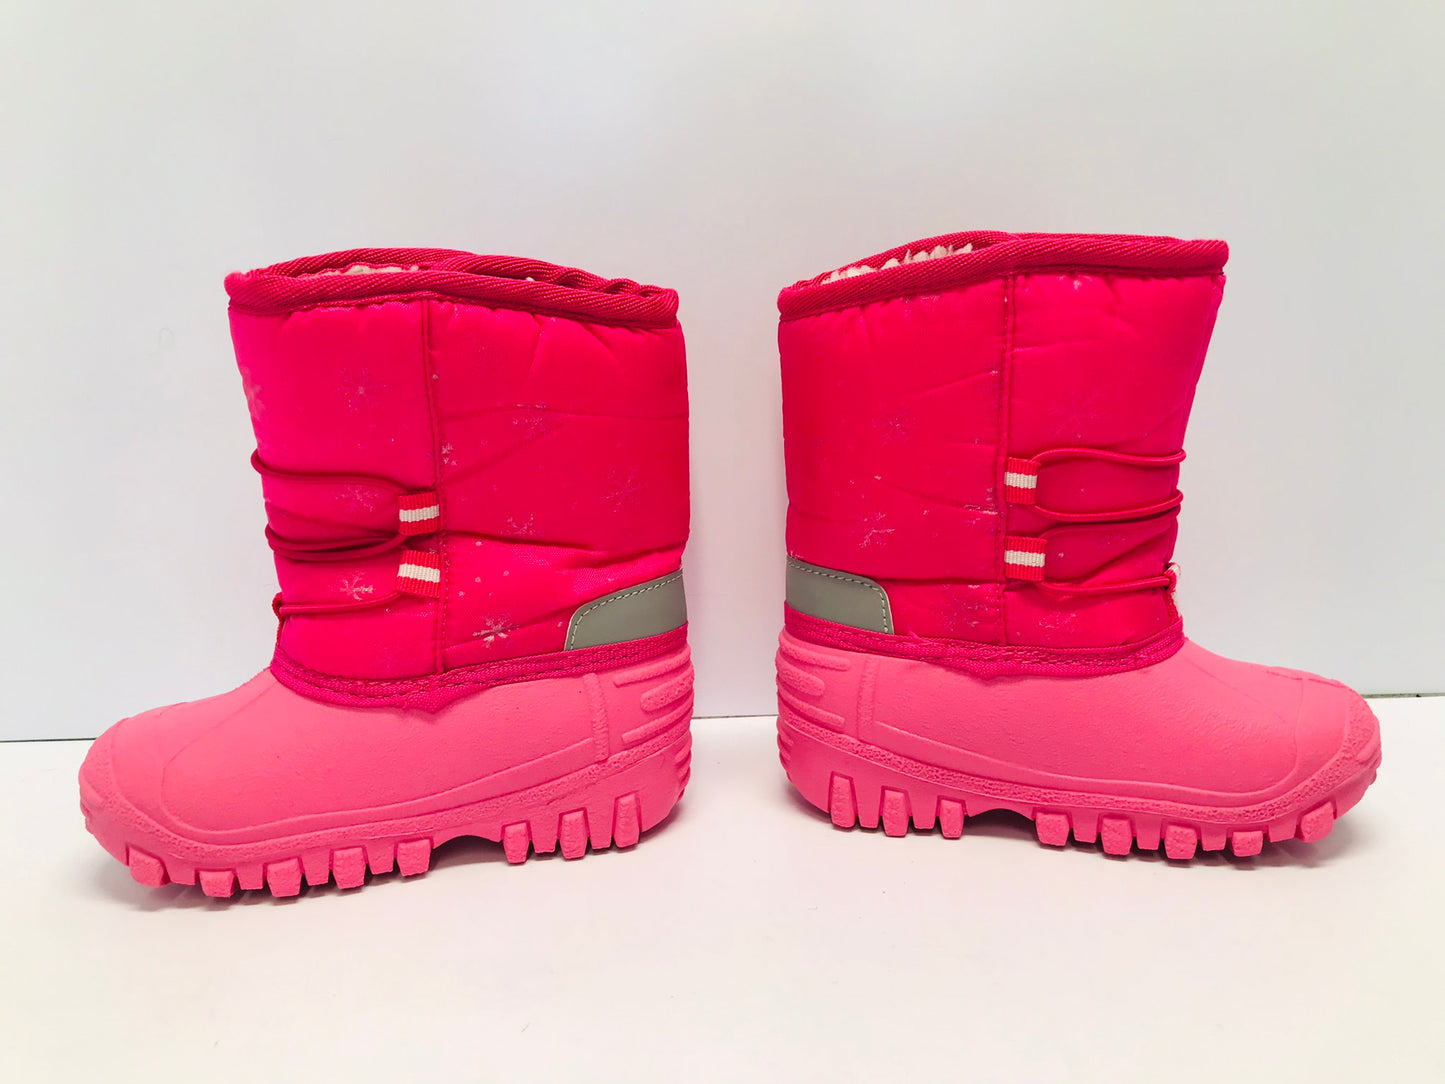 Winter Boots Child Size 8 Toddler Maple Leaf Waterproof Rubber Soles Fushia Pink New Demo Model